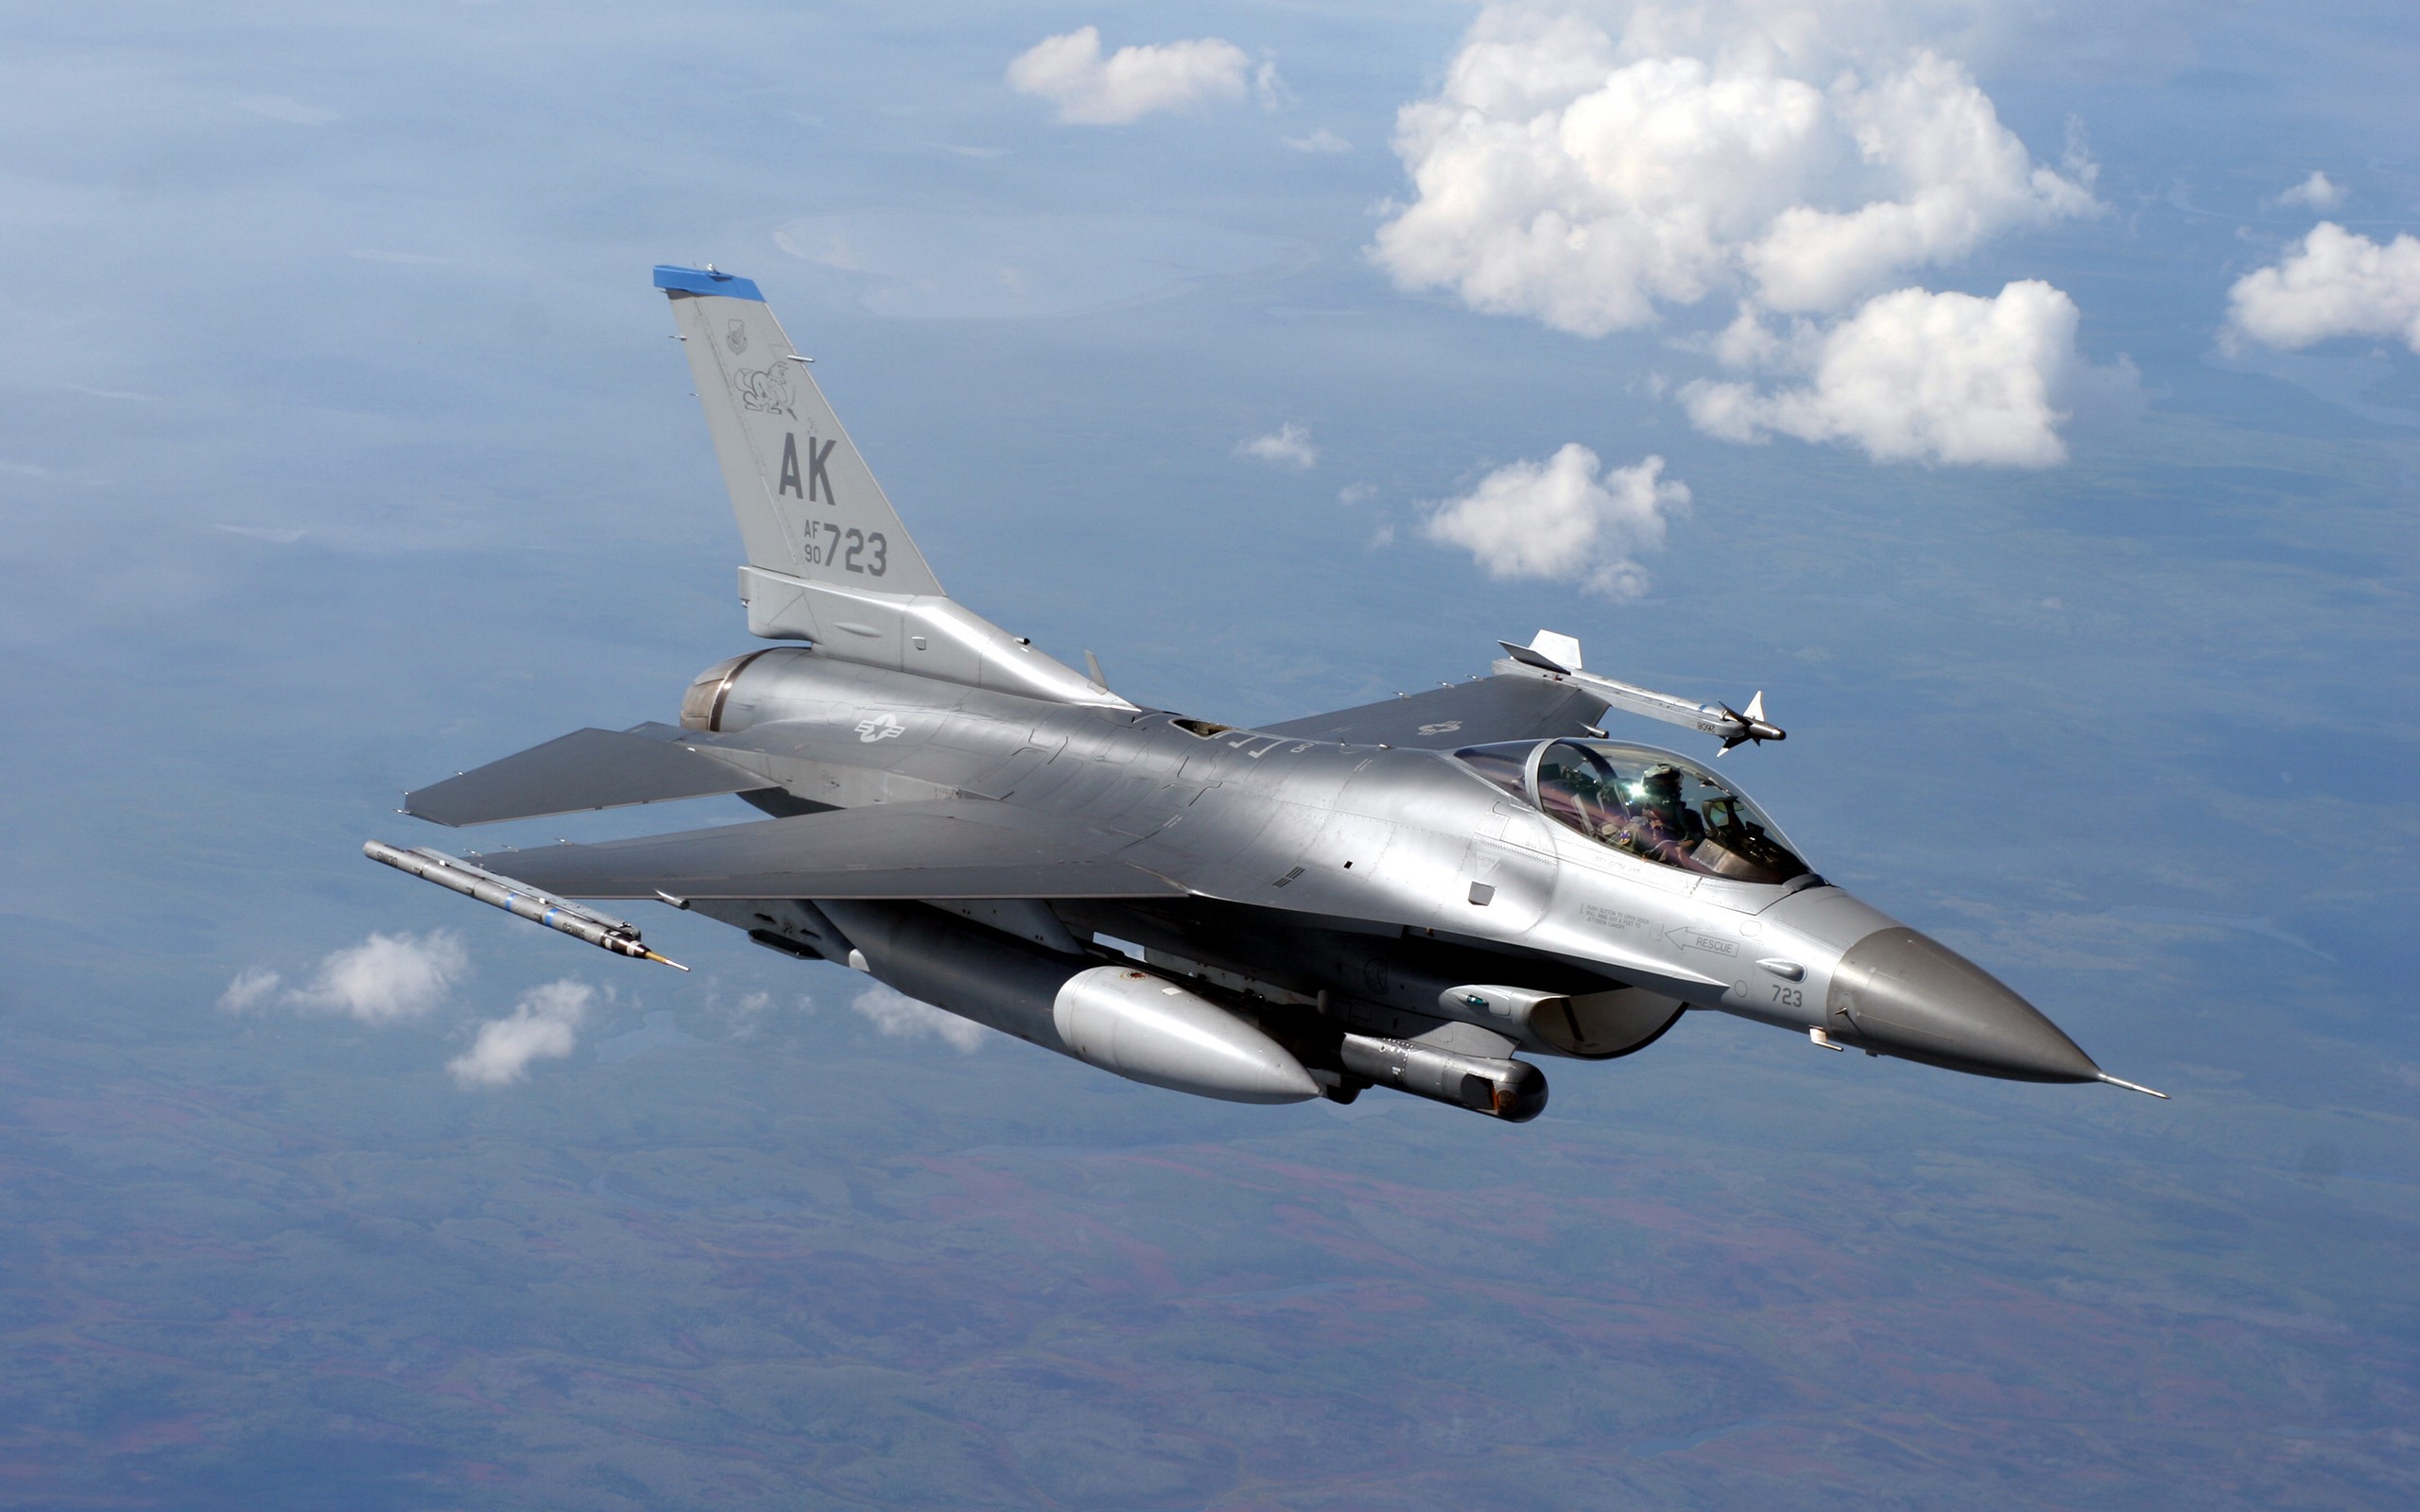 General 2560x1600 General Dynamics F-16 Fighting Falcon aircraft military aircraft military vehicle numbers vehicle US Air Force jet fighter military American aircraft General Dynamics